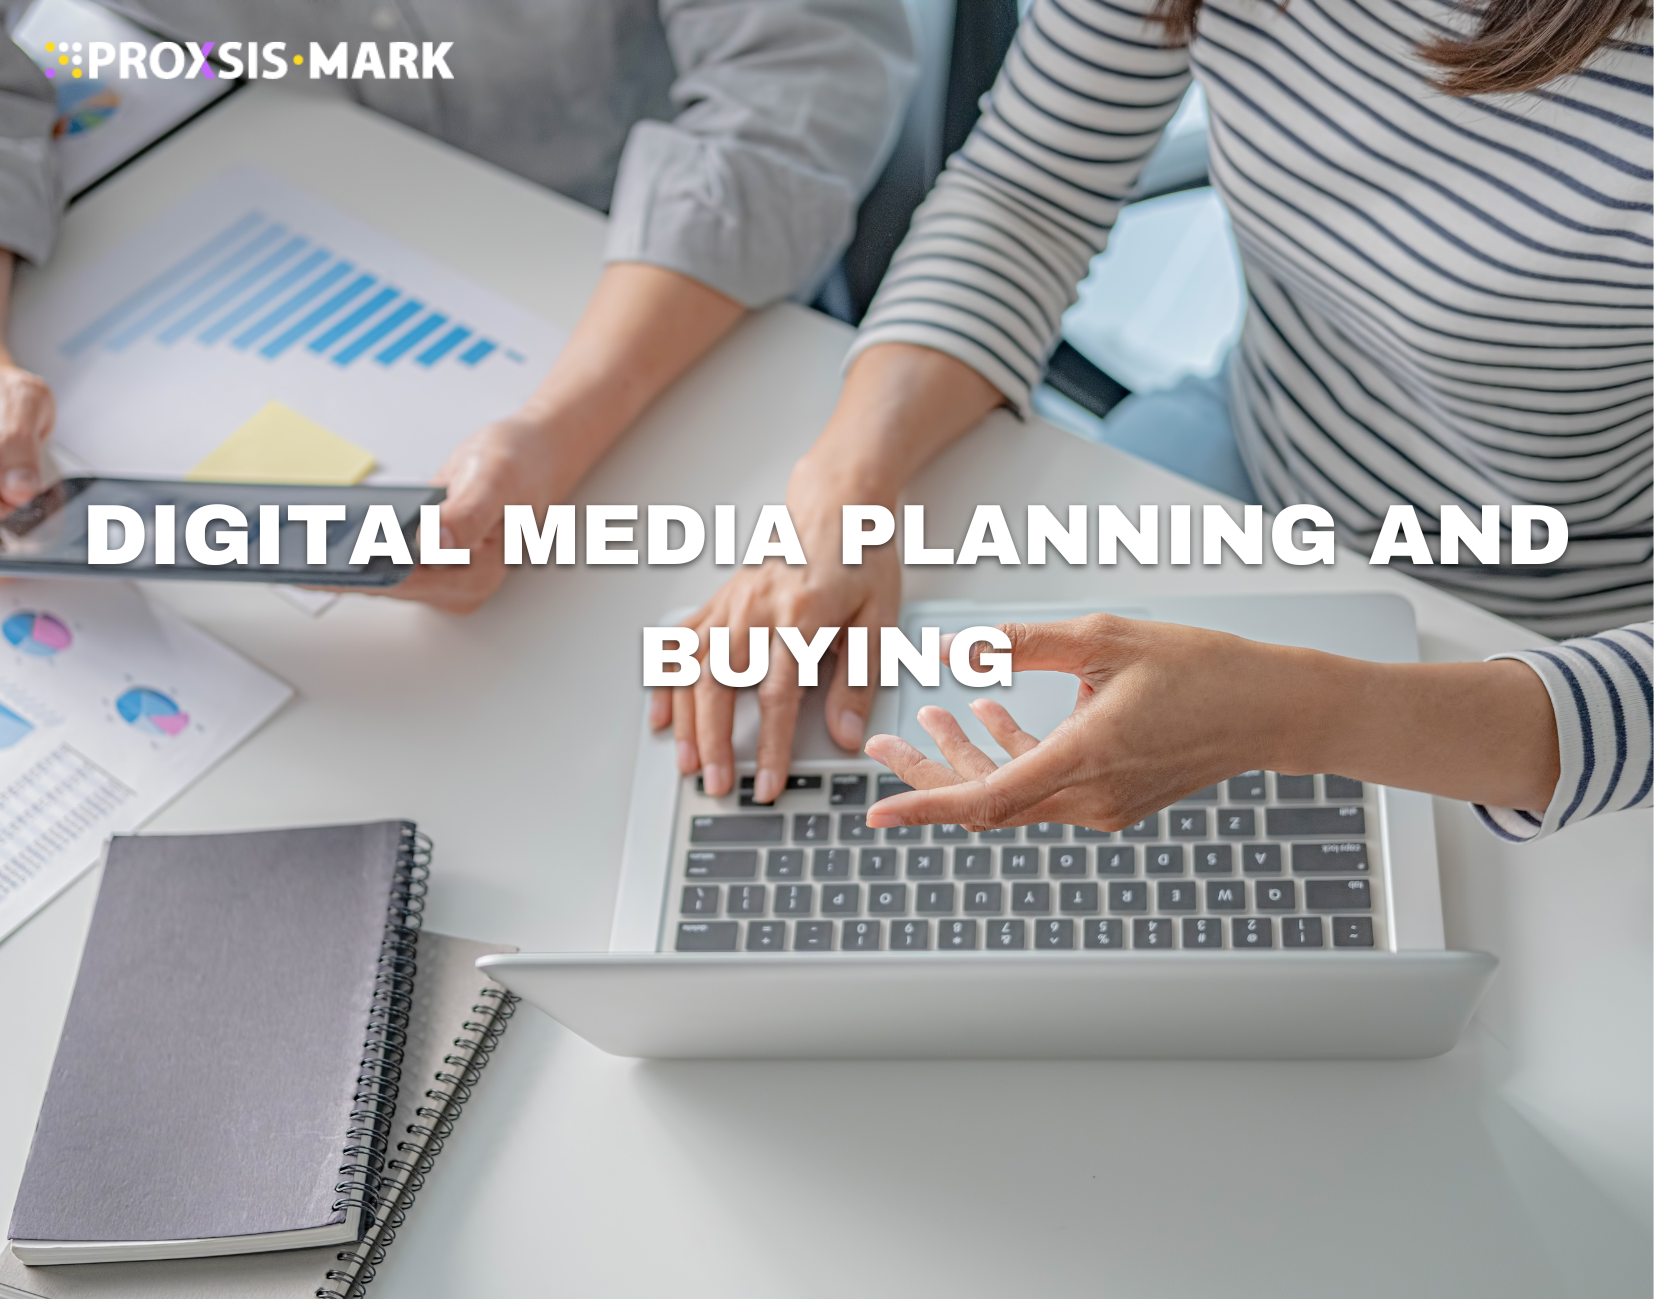 DIGITAL MEDIA PLANNING AND BUYING - Proxsis Mark